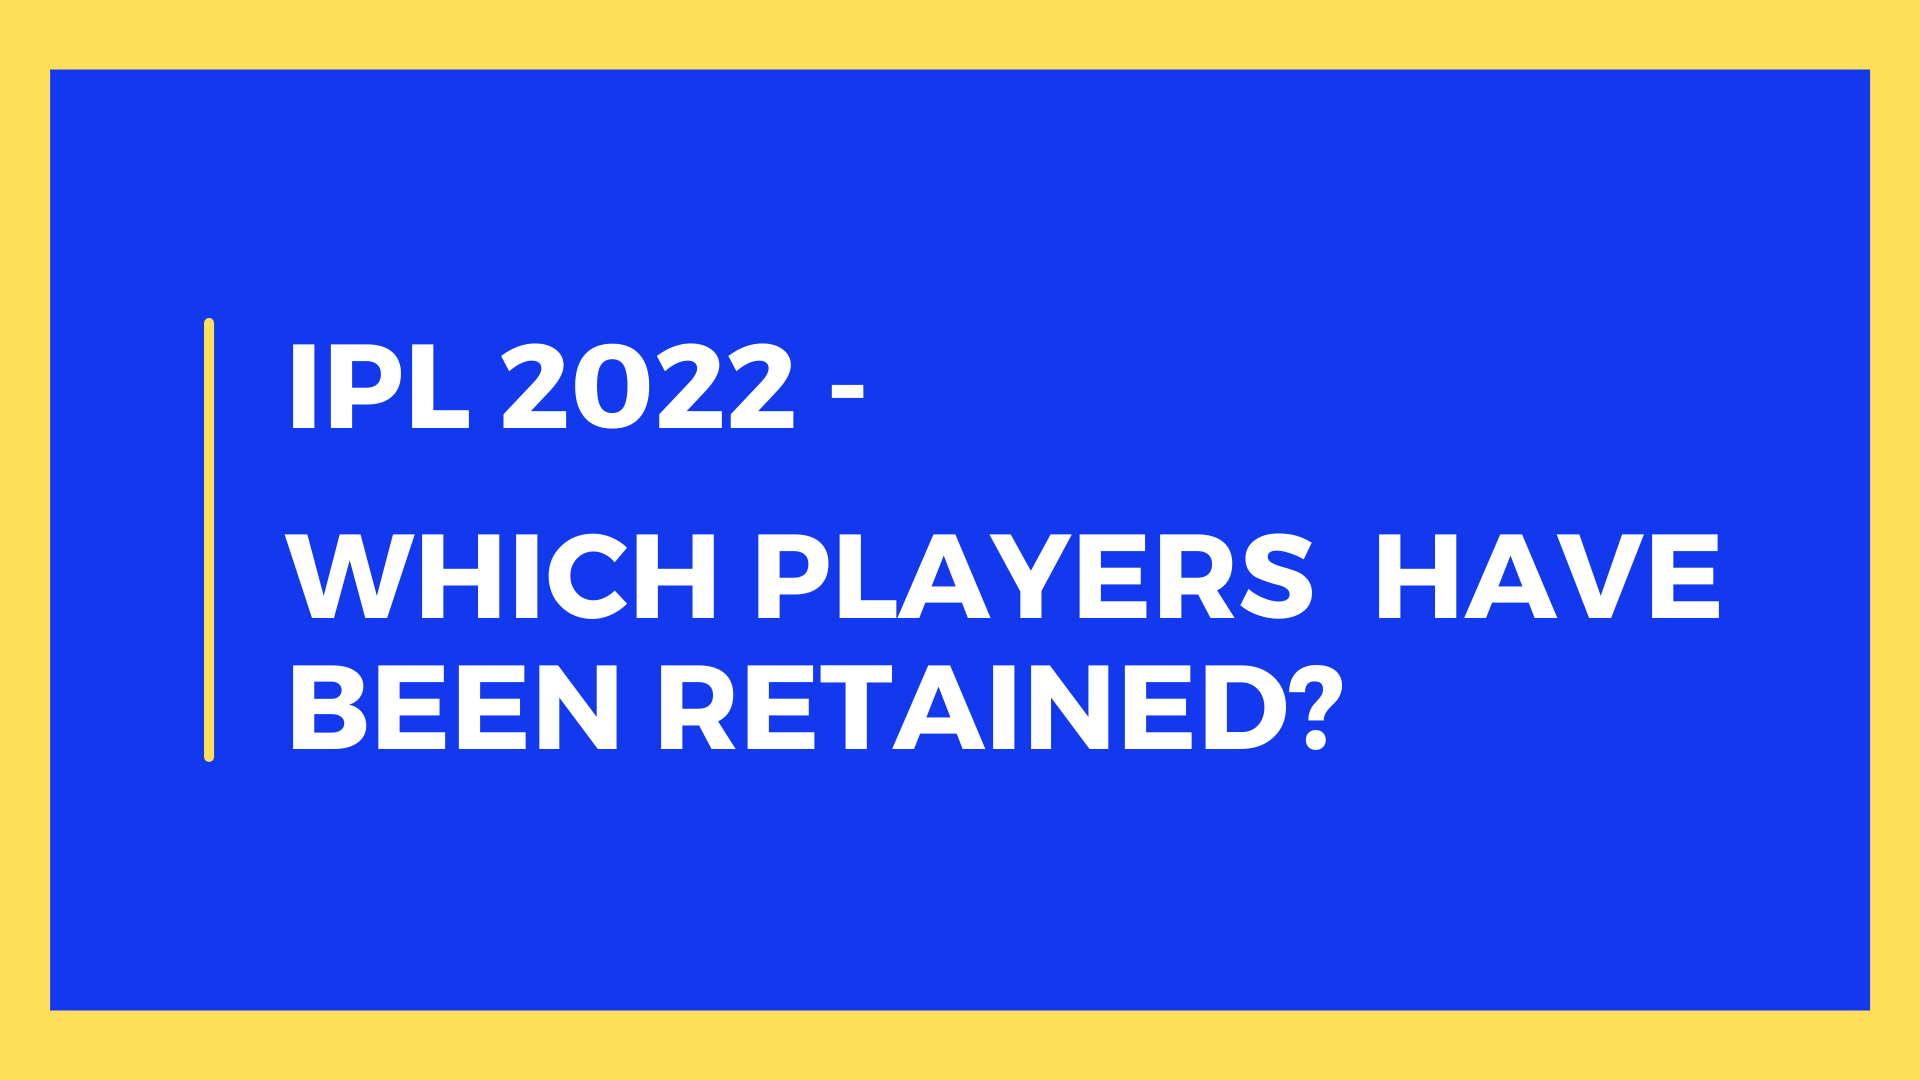 PL 2022 - Which Players have been retained?